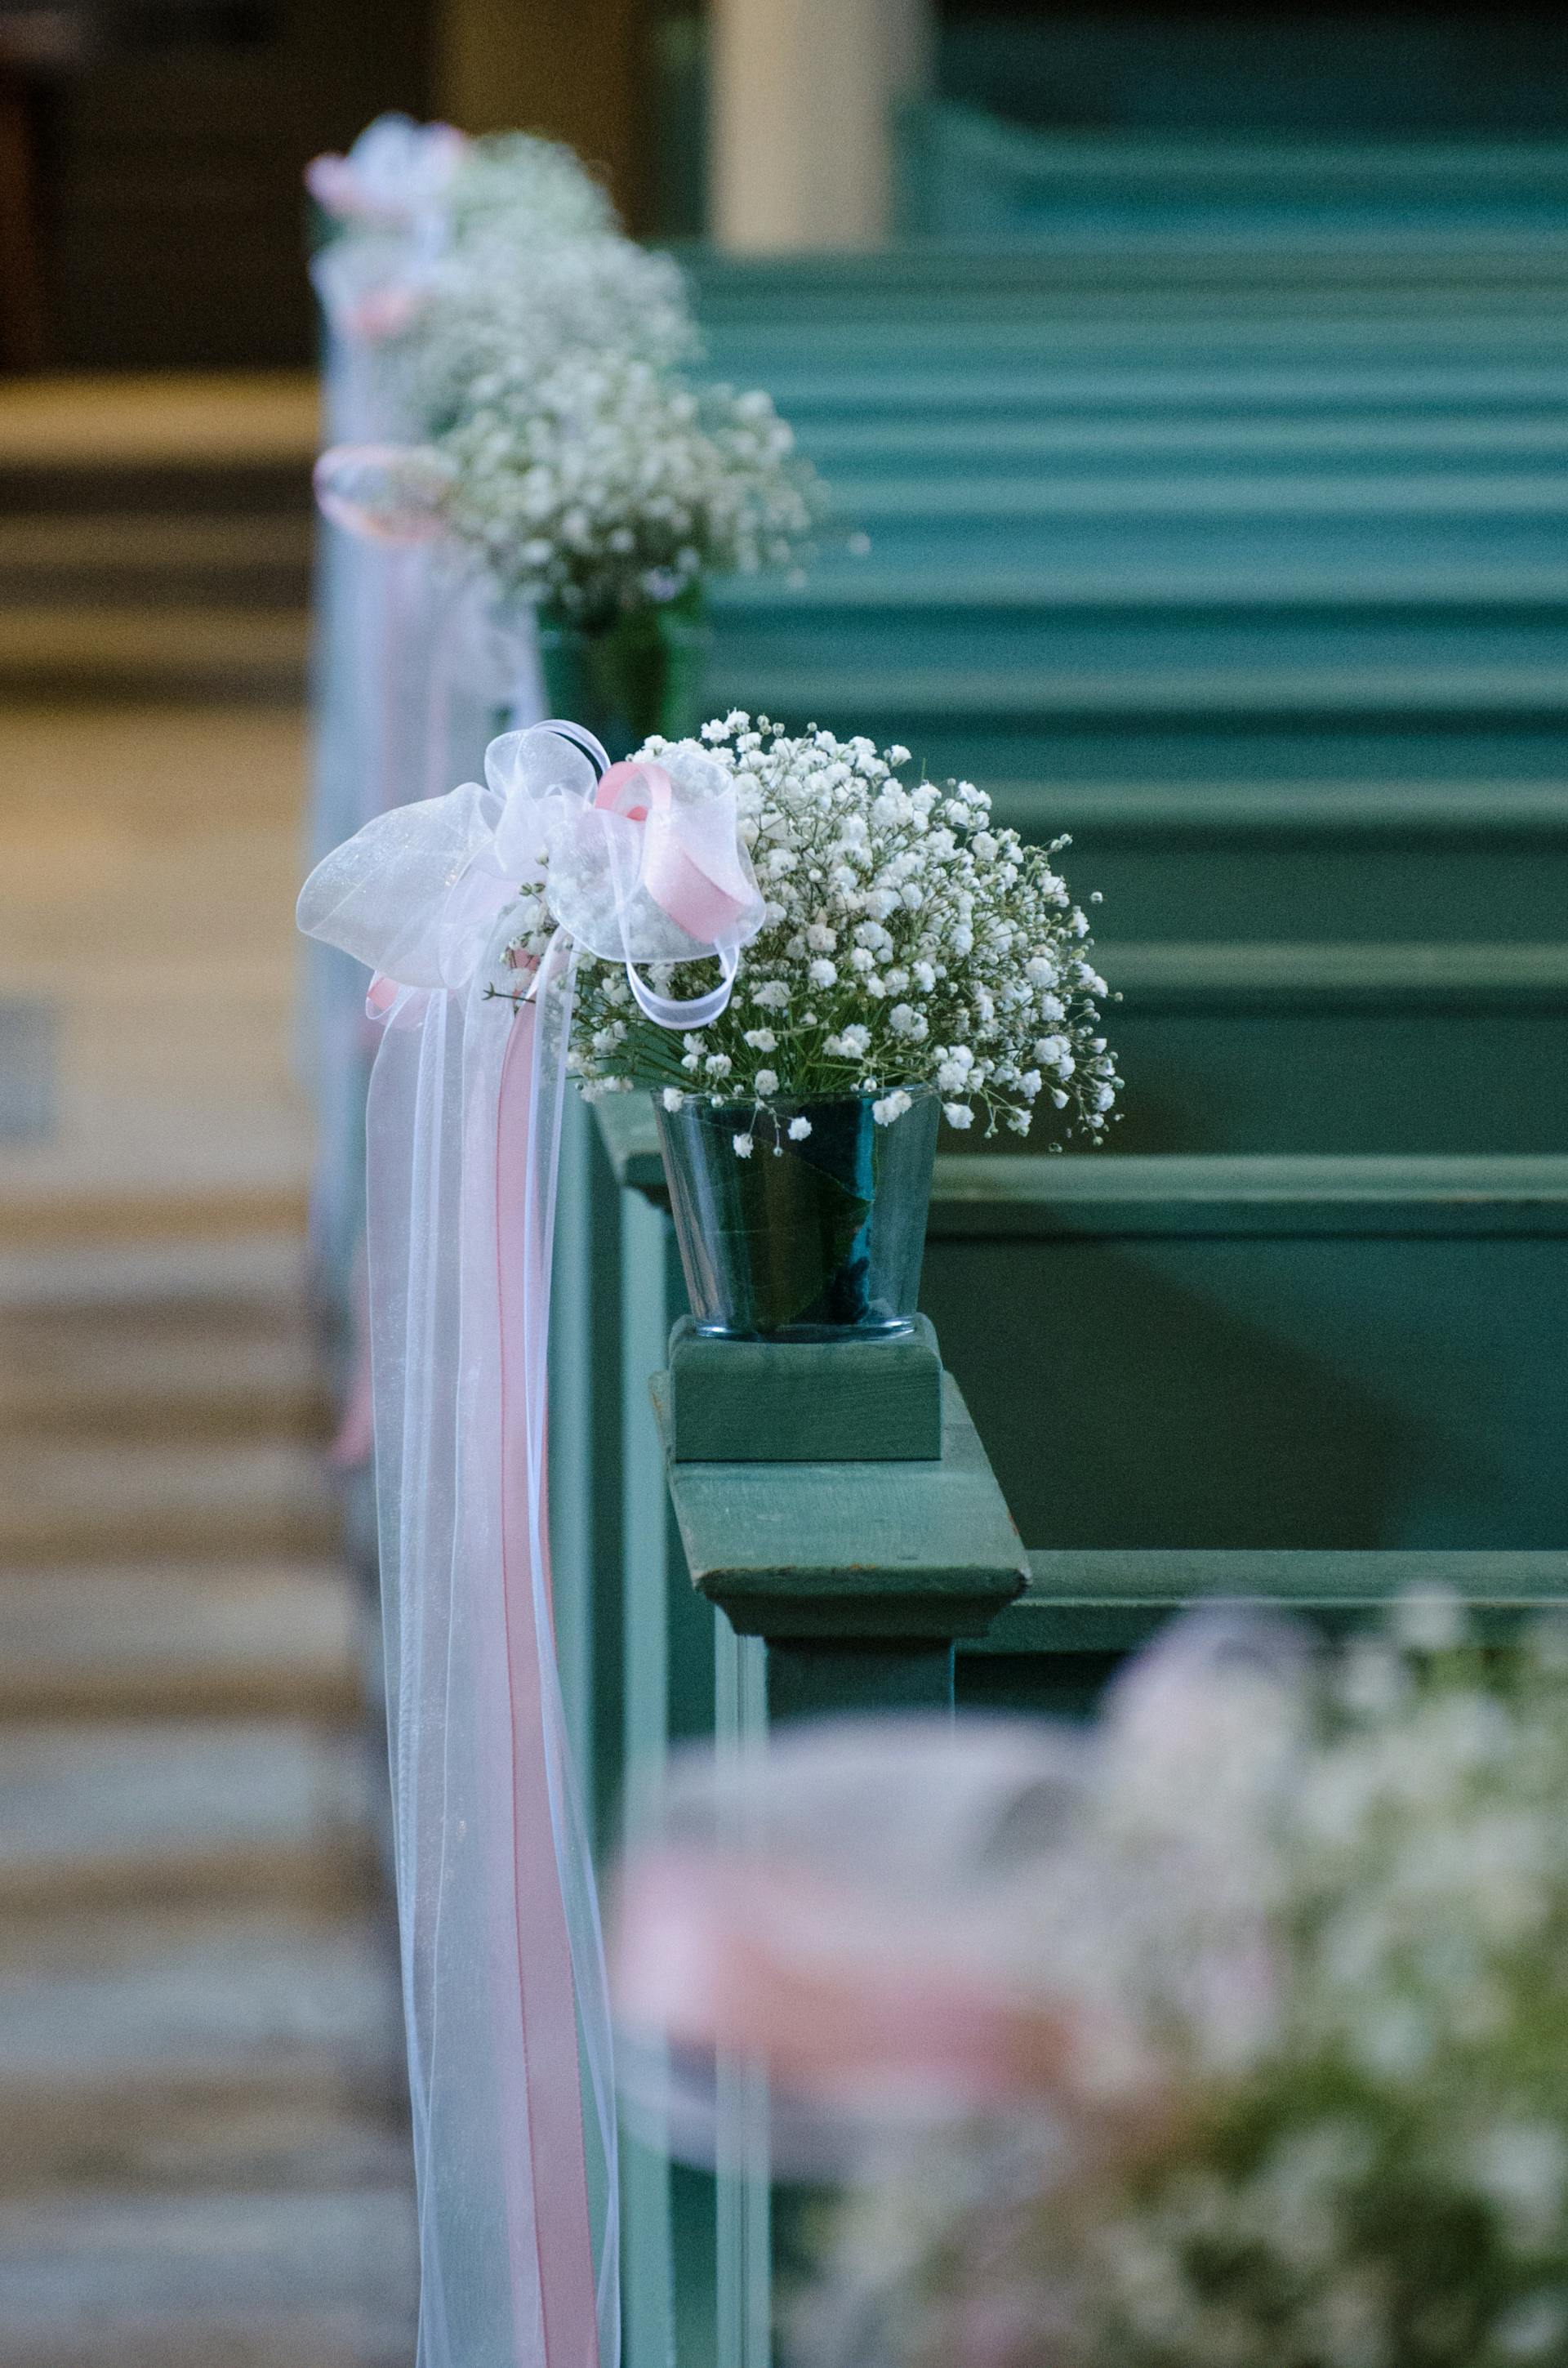 Church pews with flowers | Source: Pexels